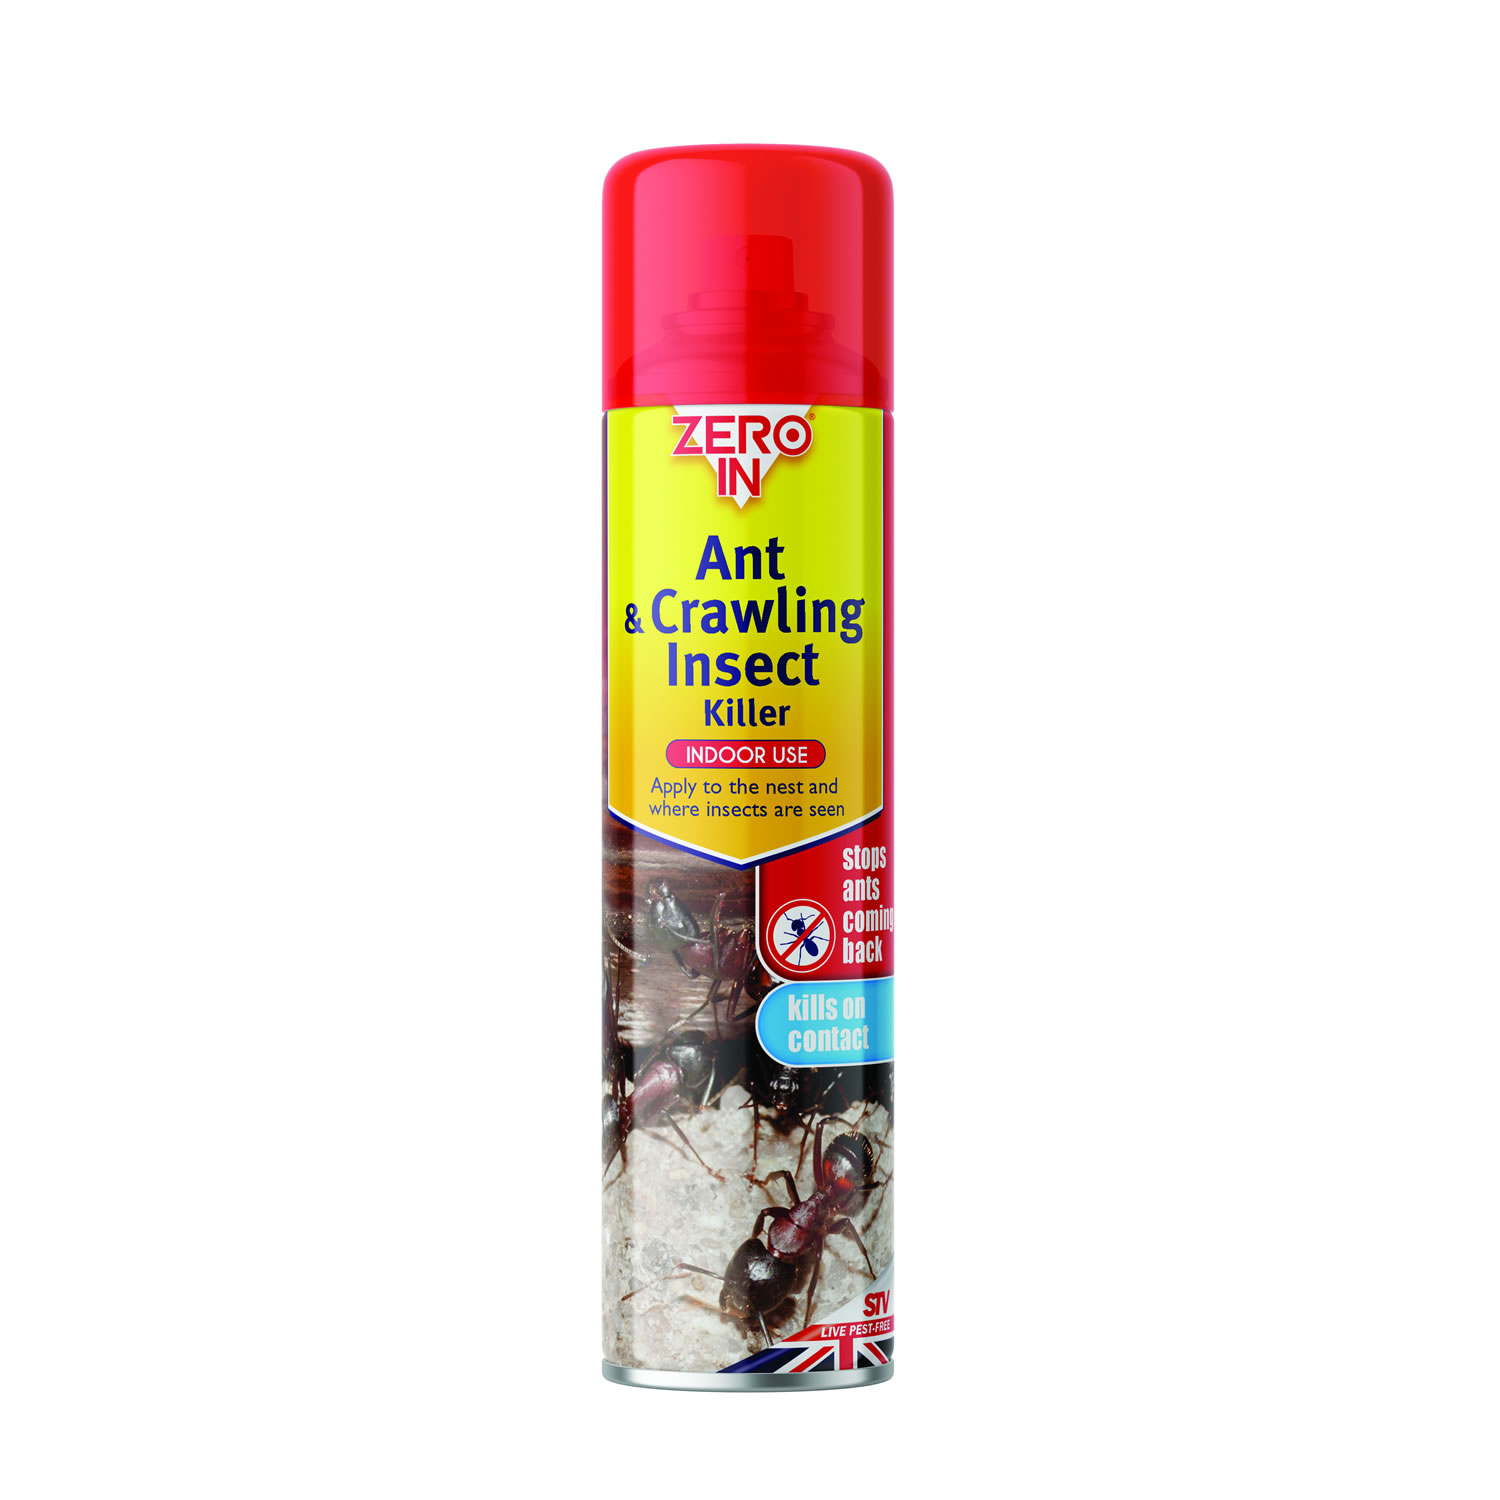 ZERO IN ANT & CRAWLING INSECT KILLER SPRAY 300 ML